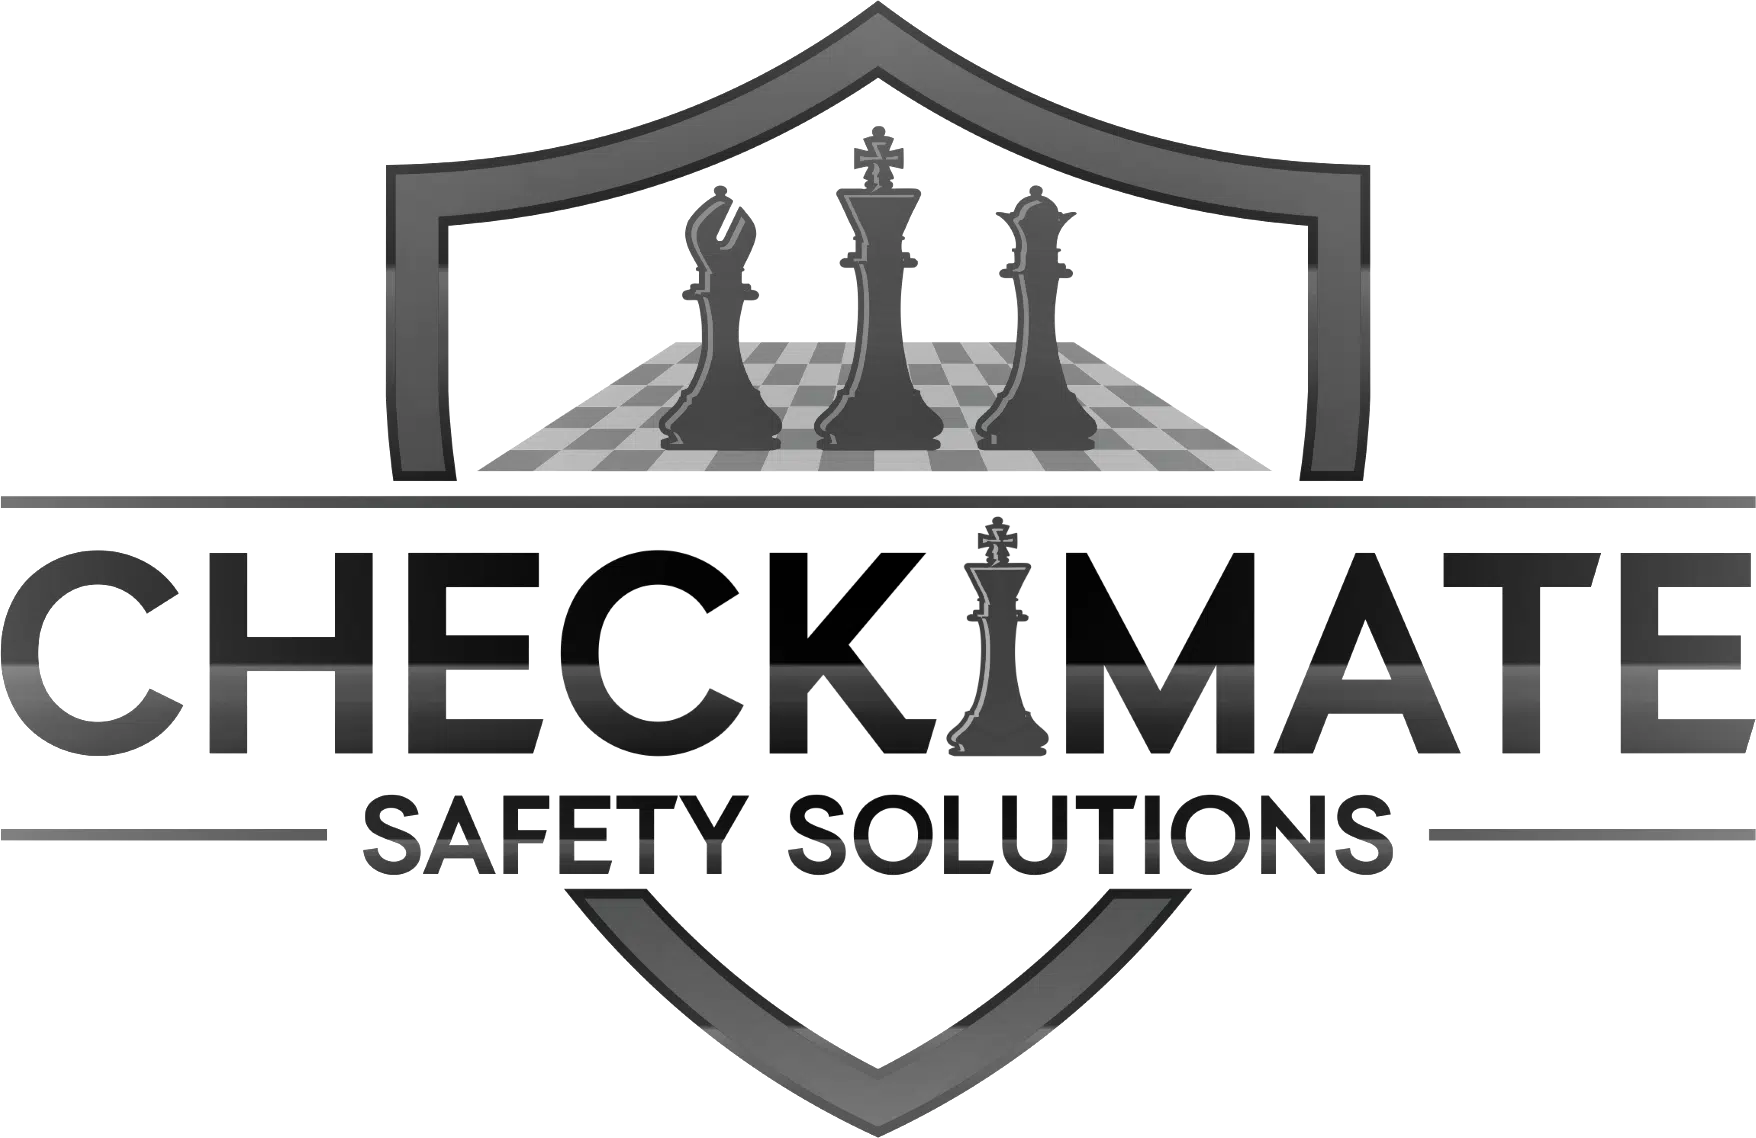 Checkmate Safety Solution